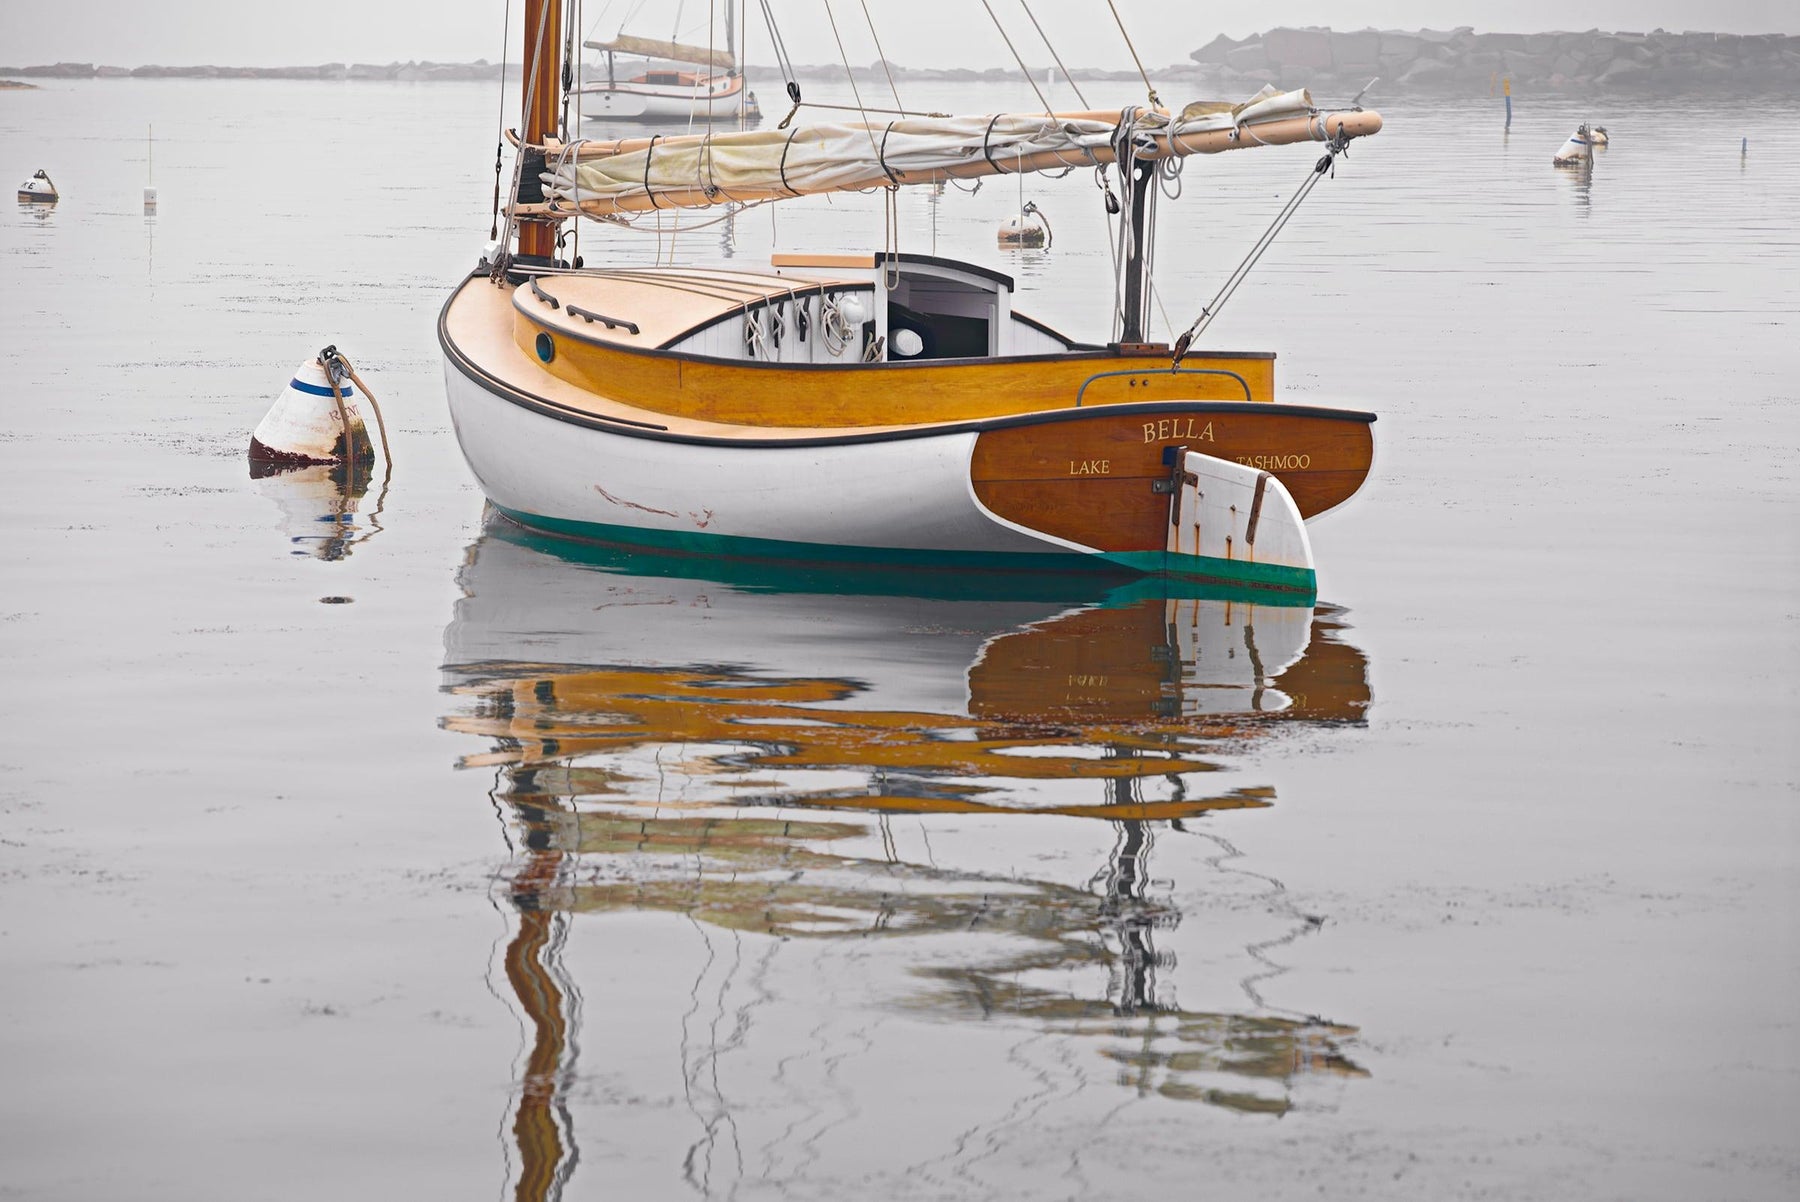 Sail boat and buoy reflecting off the water in a fog filled harbor in Martha's Vineyard Massachusetts